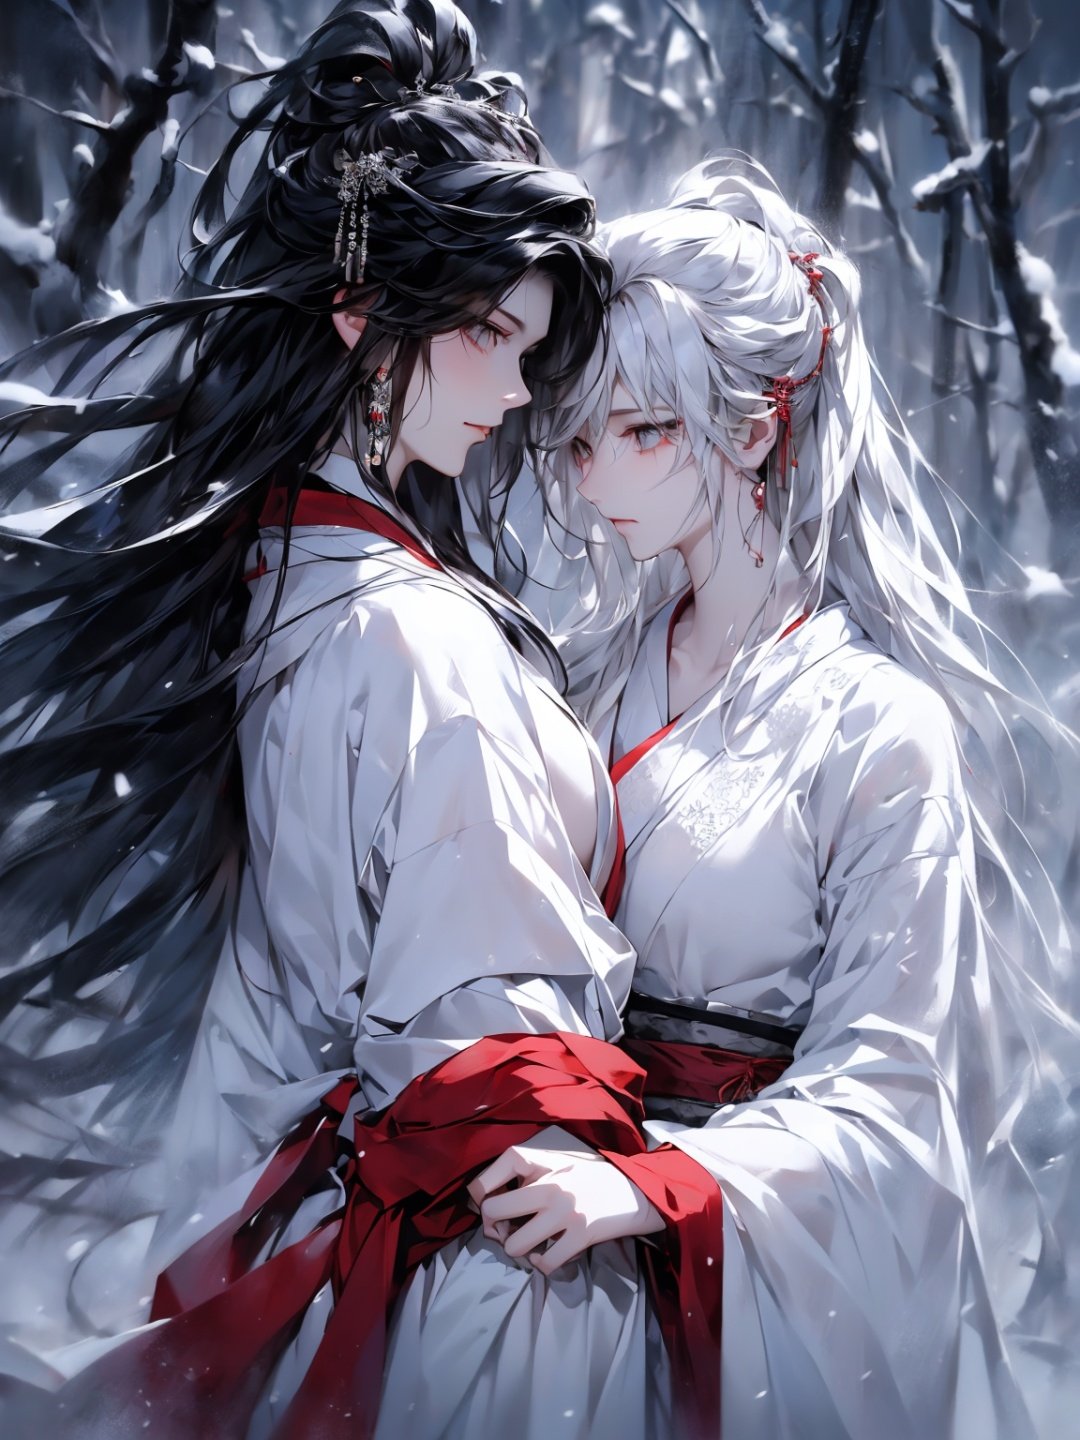 Top Quality, Realistic, Jet Black Background, High Resolution, Soft Focus, (Snowfall: 1.5), (Haze: 1.5), (In the Deep Forest), (Snowfalling), ((Snow Light)), (Snow Storm)), (Snow Storm)))), (Ghost of a beautiful snow woman with jet-black long black hair in a white and silver yukata), Anger, Fury, Melancholy, Shaking black hair, Hair luster, Glowing skin, Beautiful and beautiful, Bewitching, Chaos, Depth of Field, (Ghost: 1.5), ((Lose yourself in anger and forget the cold)), ((Arms spread forward)), (Monochrome: 1.5), (Black and white: 1.5), (Platinum eyes glaring at you), (Gradually becoming transparent towards the lower body: 1.5)